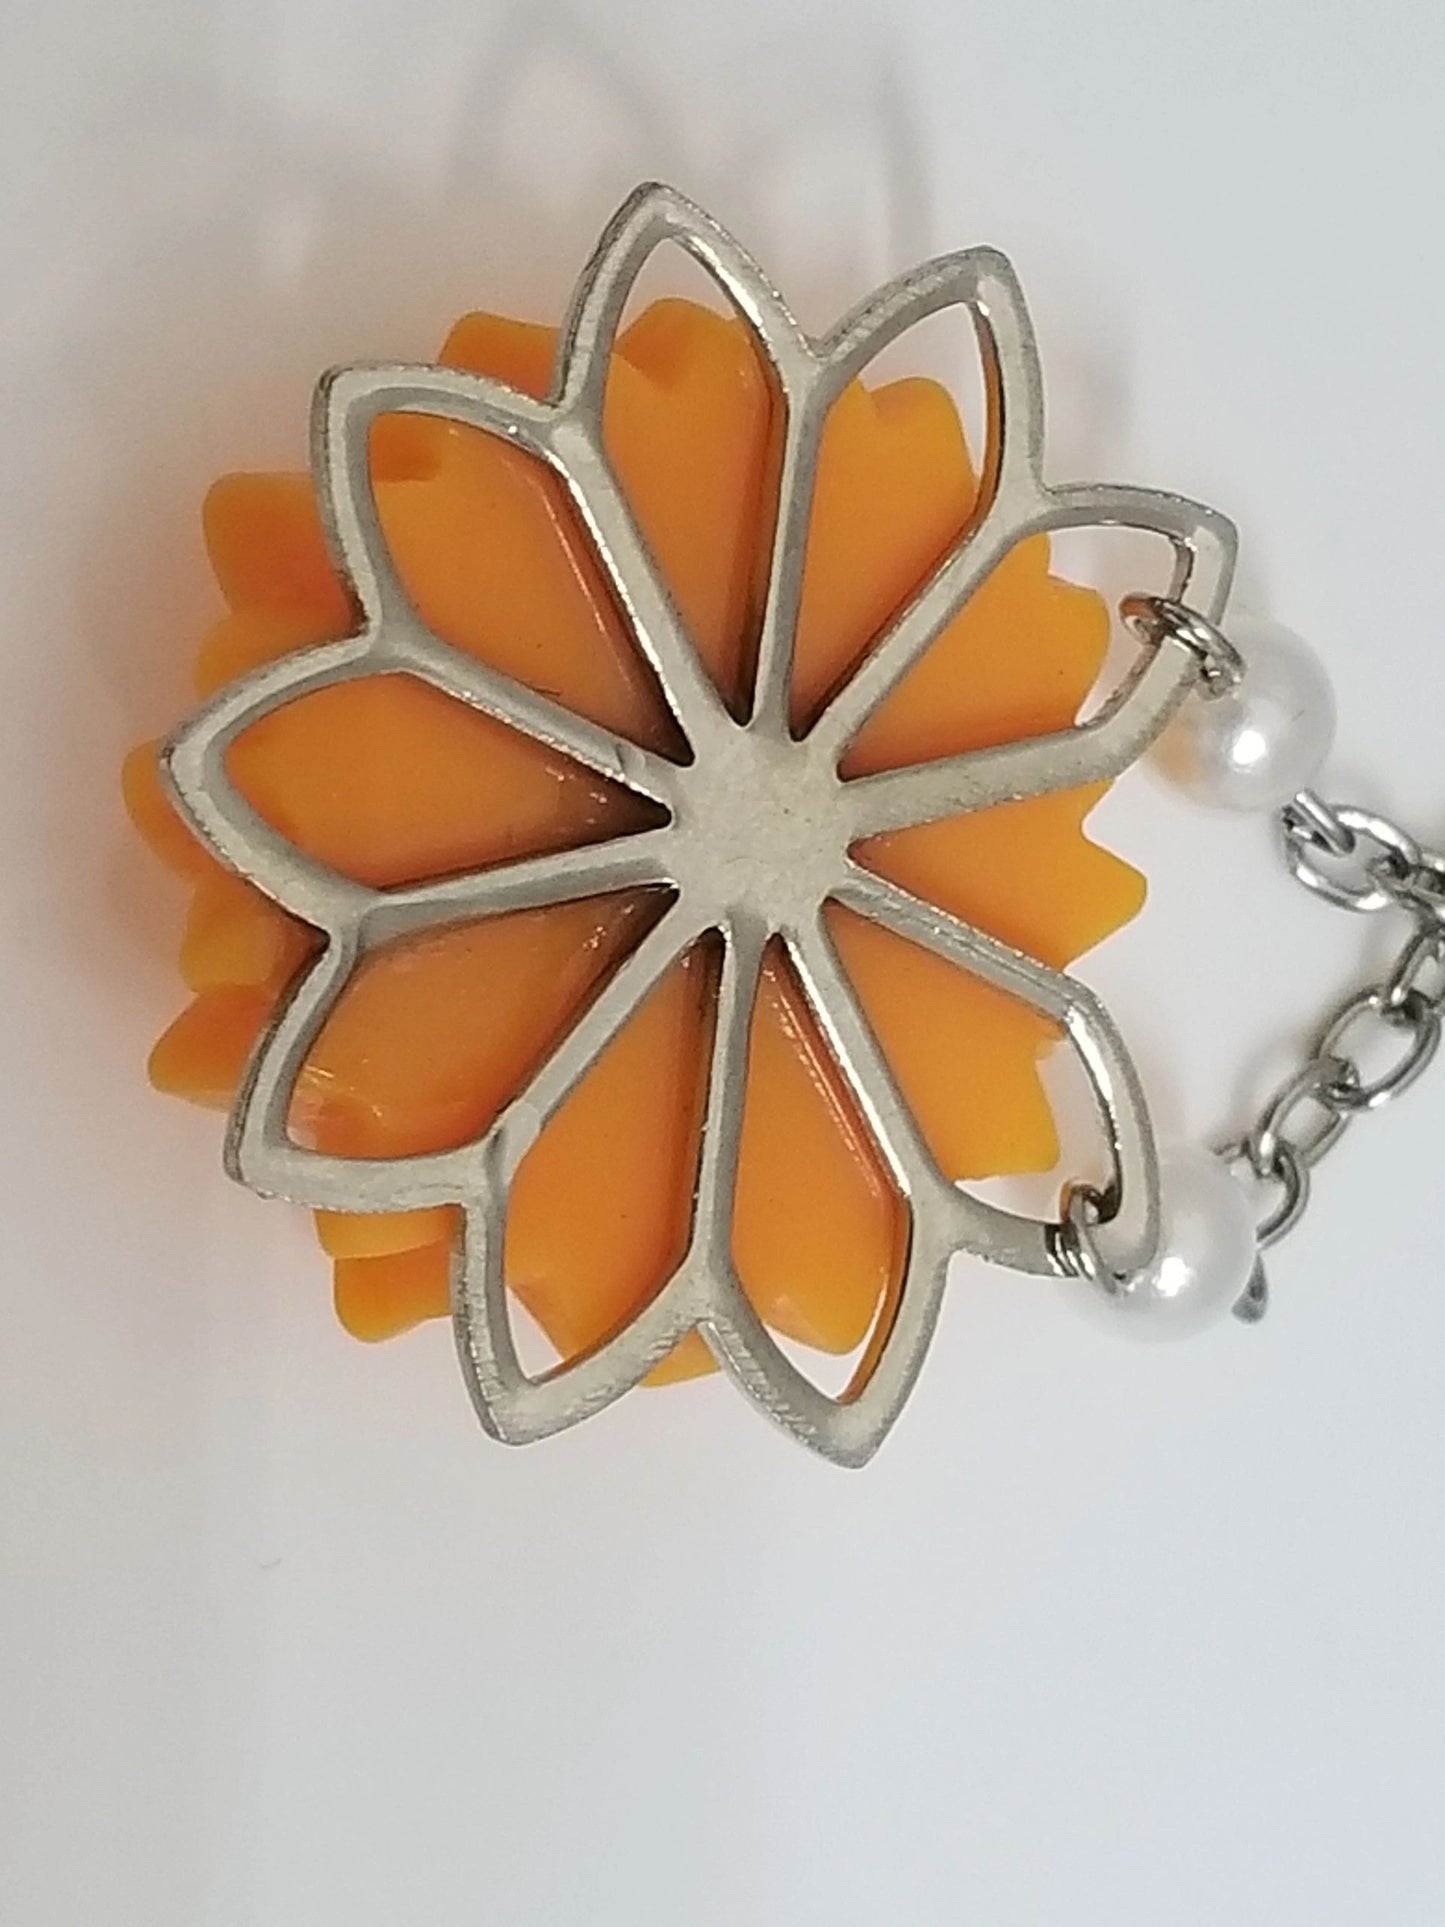 Orange Floral Silver-backed Pendant w/ Silver Chain Necklace